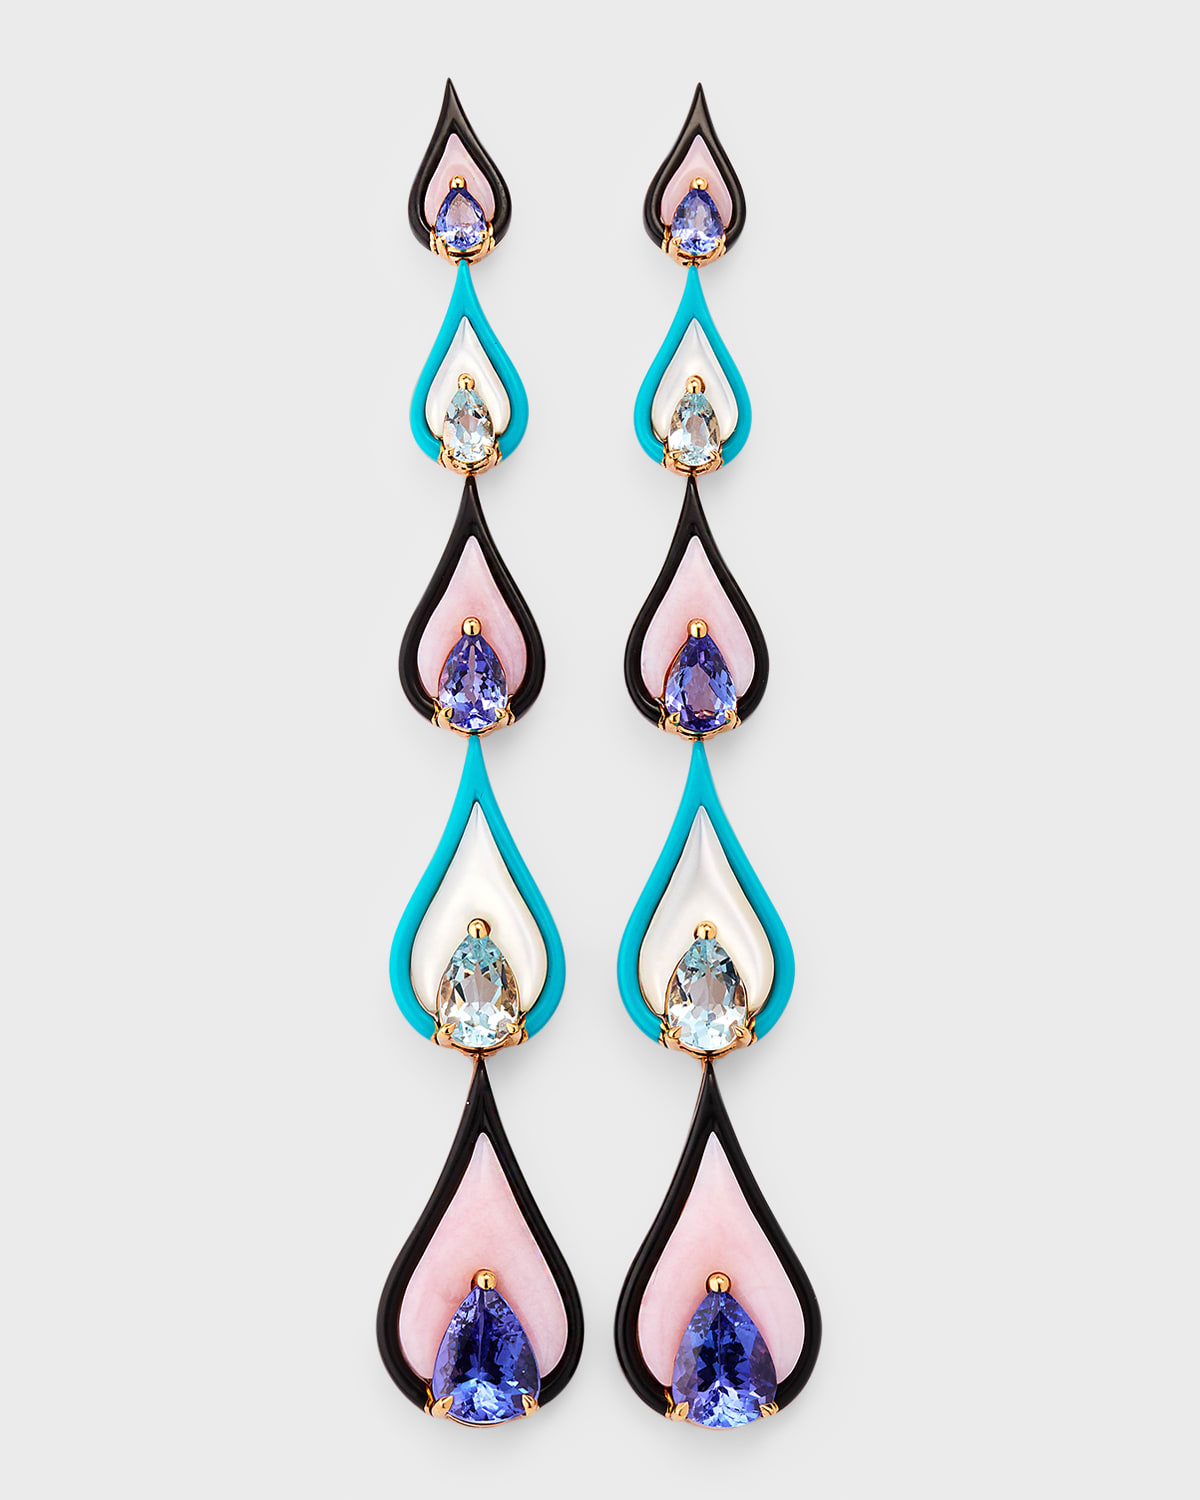 18K Pink Gold Earrings with Aquamarine and Tanzanite Pears